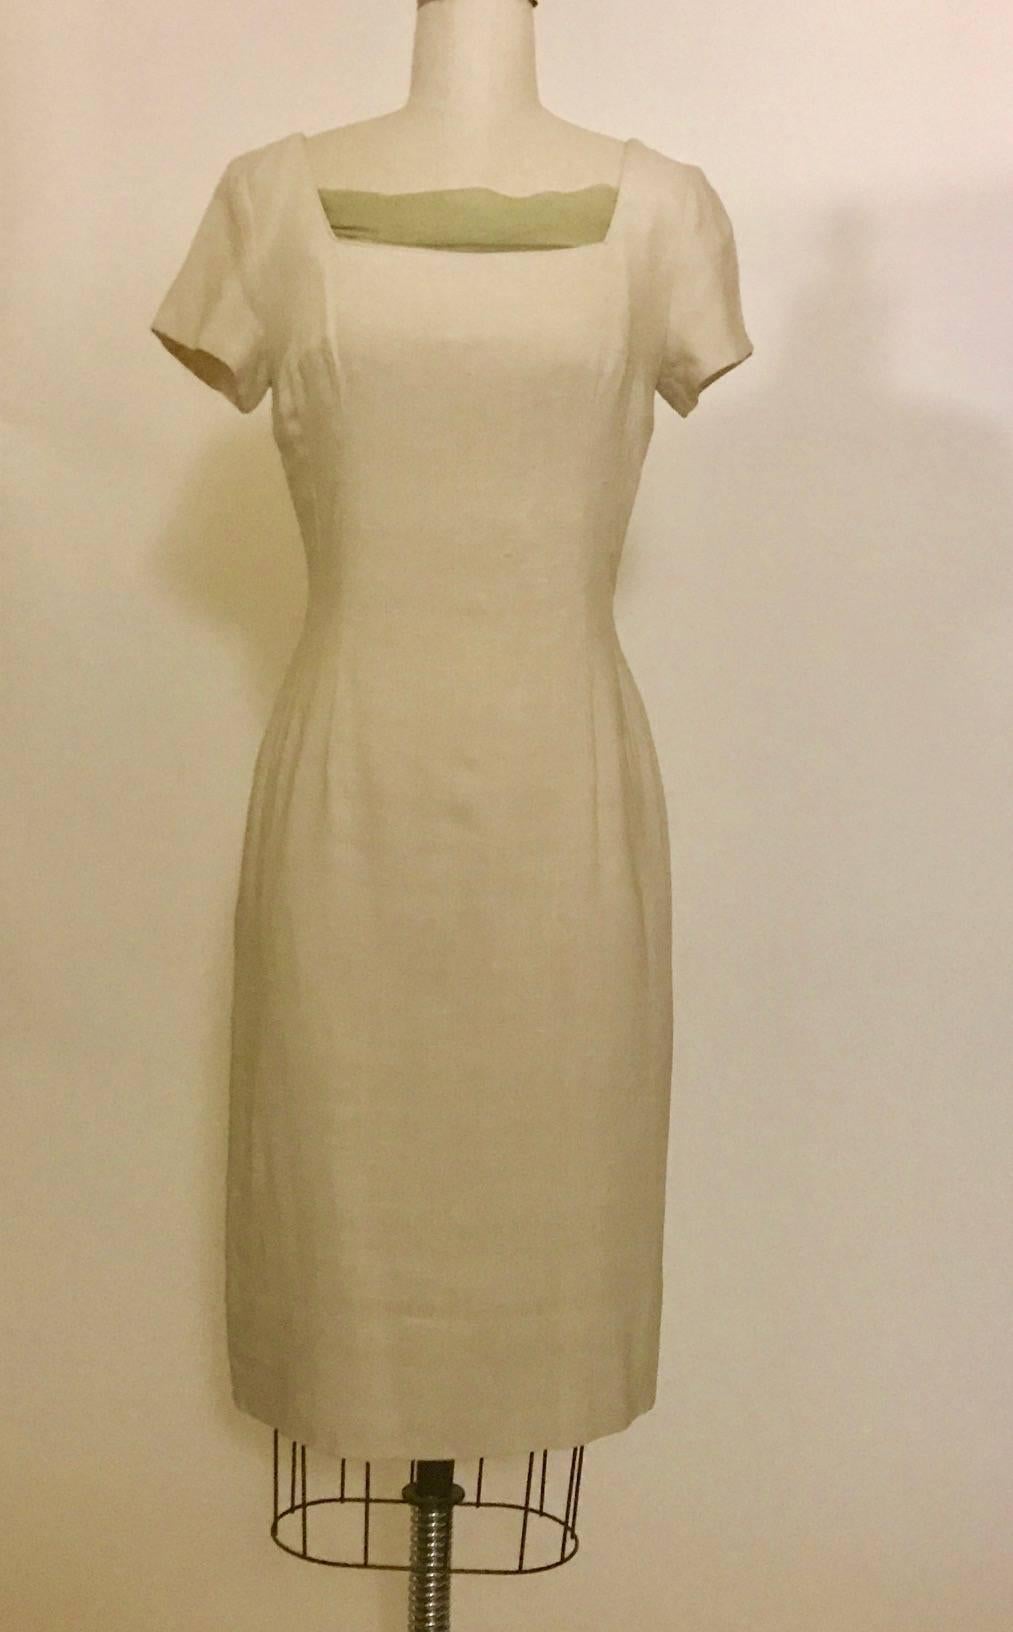 Late 1950s or early 60s Mr. Blackwell silk shift dress in a dark cream/natural color. Square neck, short sleeves. Back metal zip with tiny bow at top. 

No garment label, feels like mid-weight silk. Natural slubs throughout. 

No size label, best